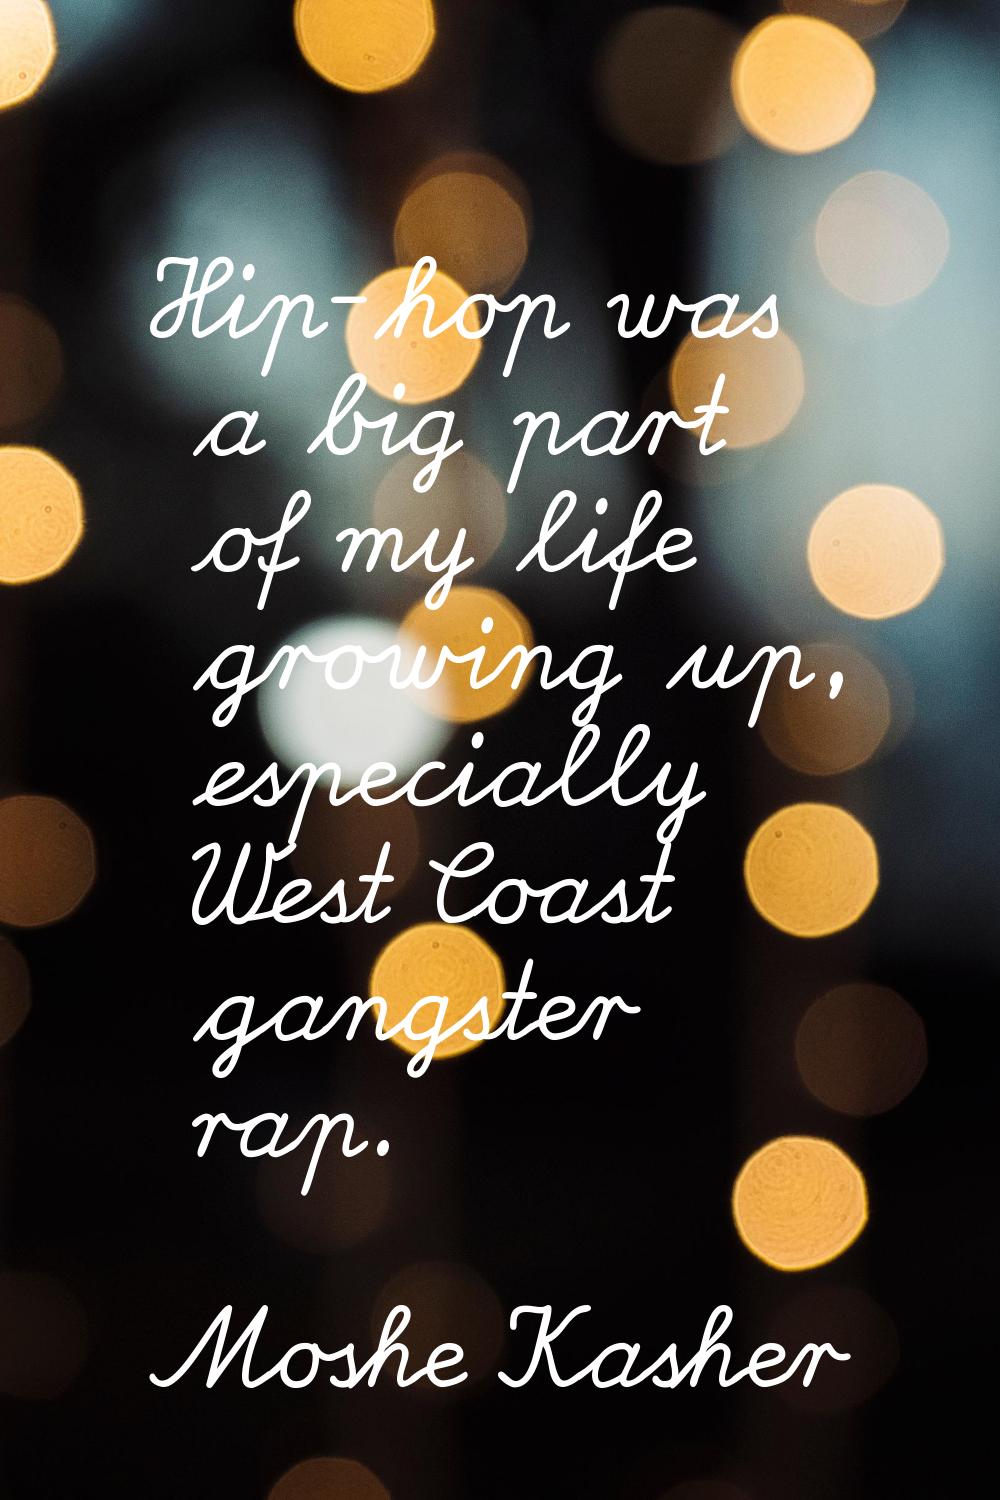 Hip-hop was a big part of my life growing up, especially West Coast gangster rap.